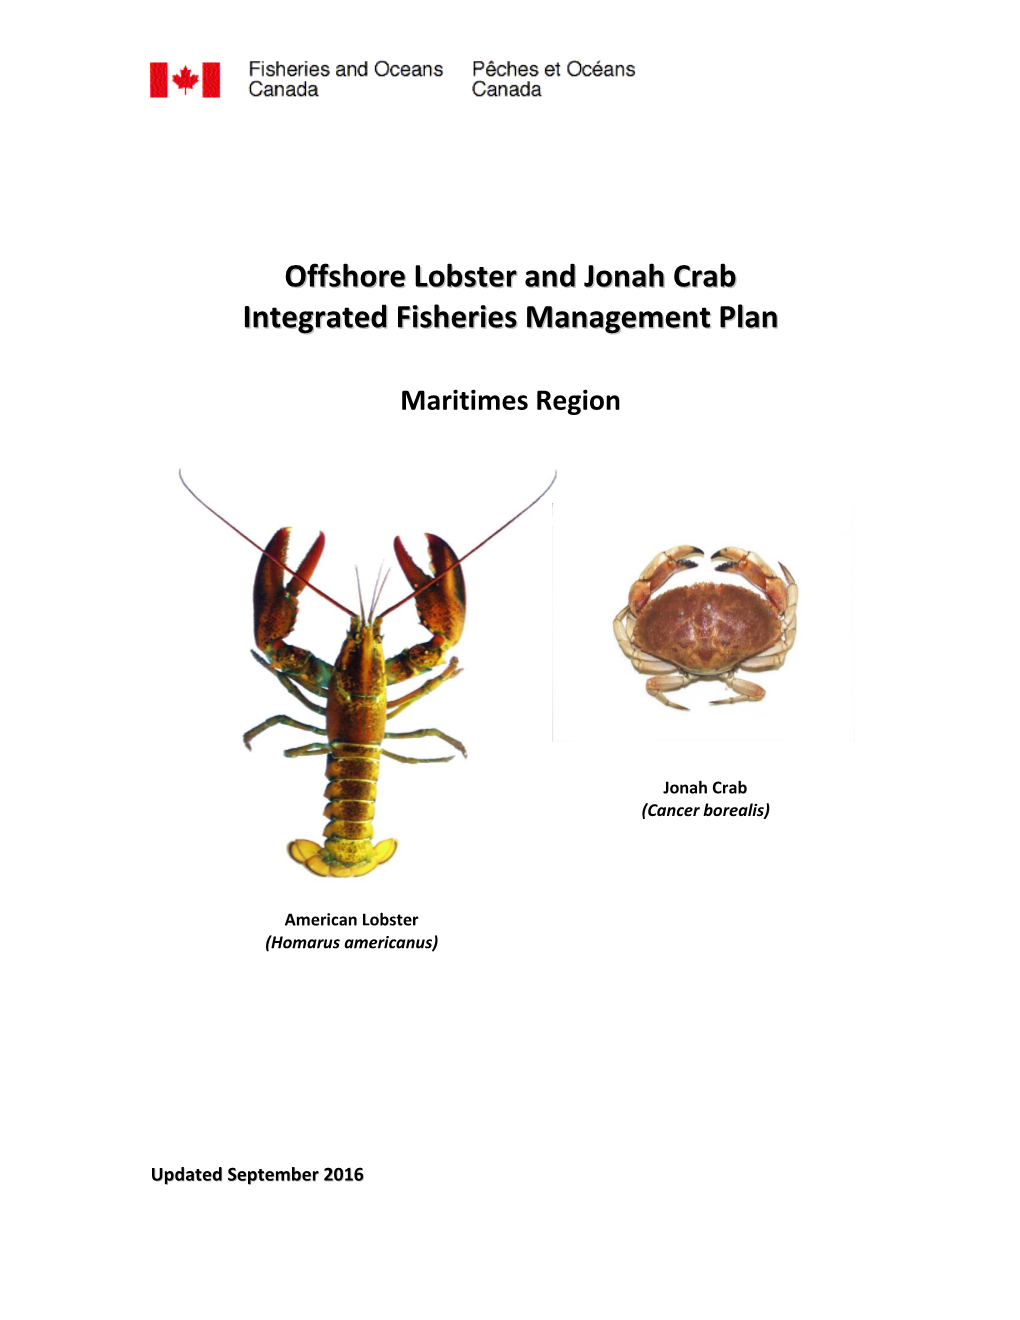 Offshore Lobster and Jonah Crab Integrated Fisheries Management Plan